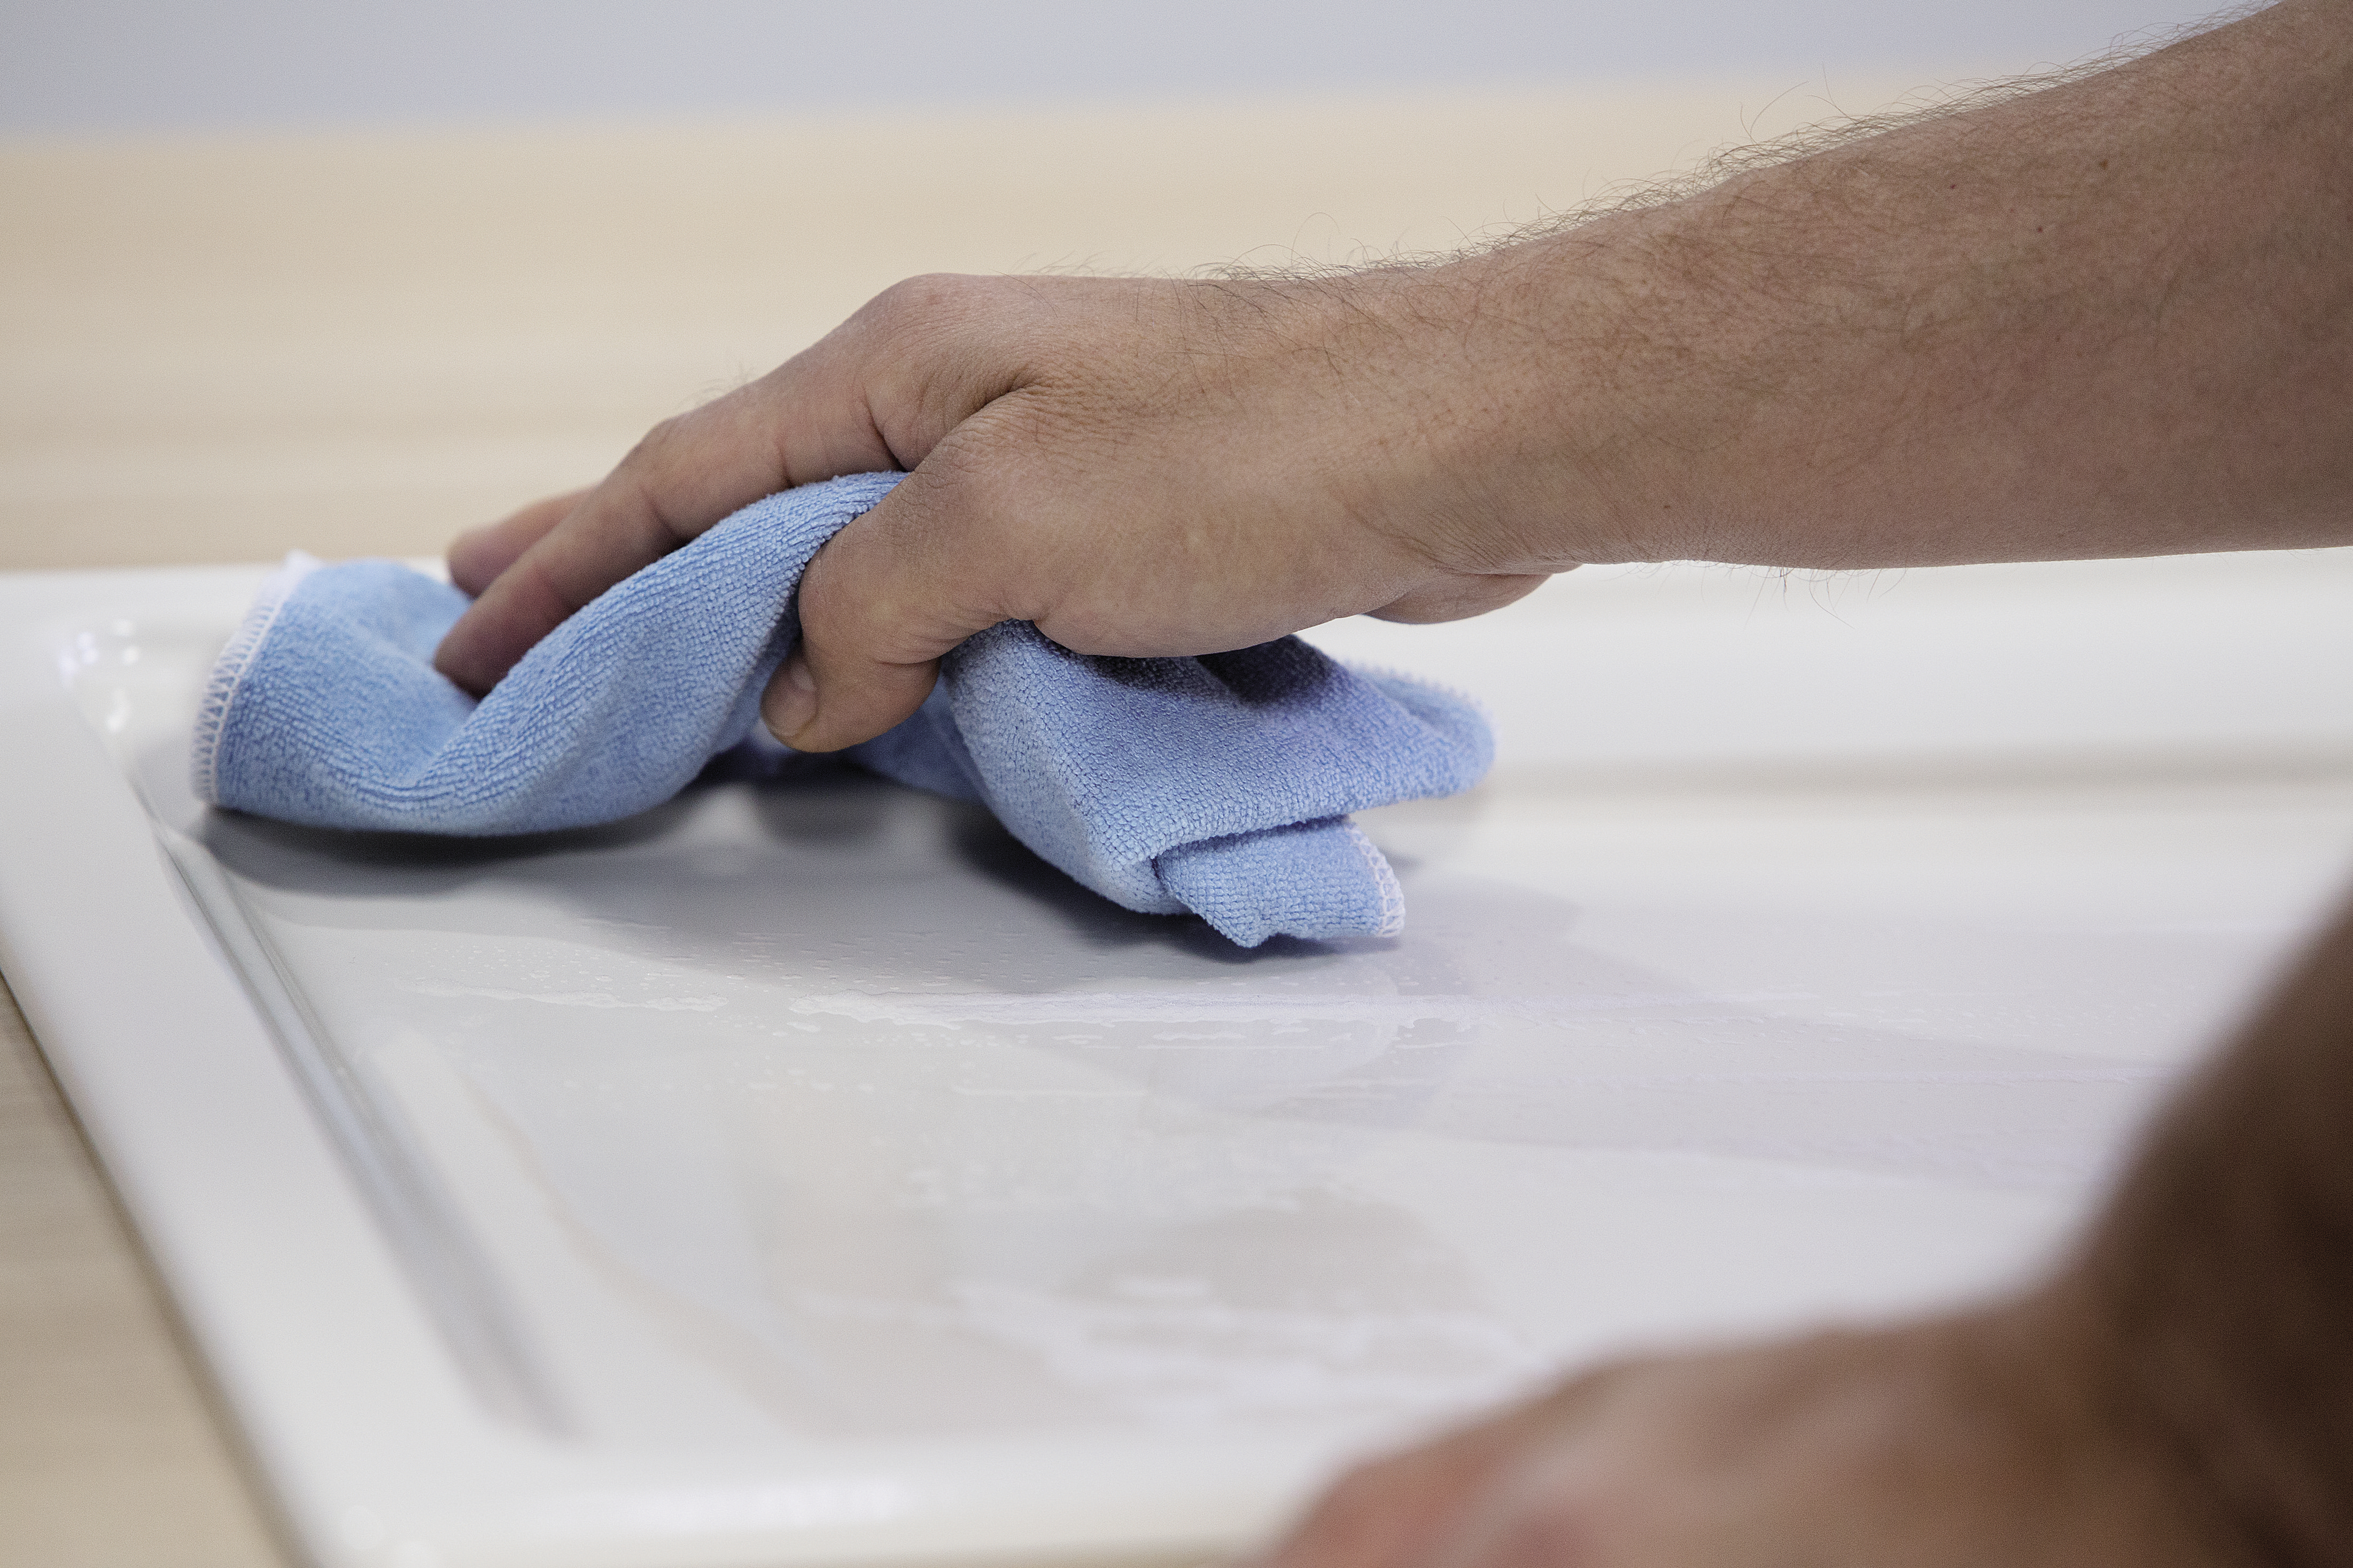 Rub the sink dry with a microfibre cloth so that there are no streaks.